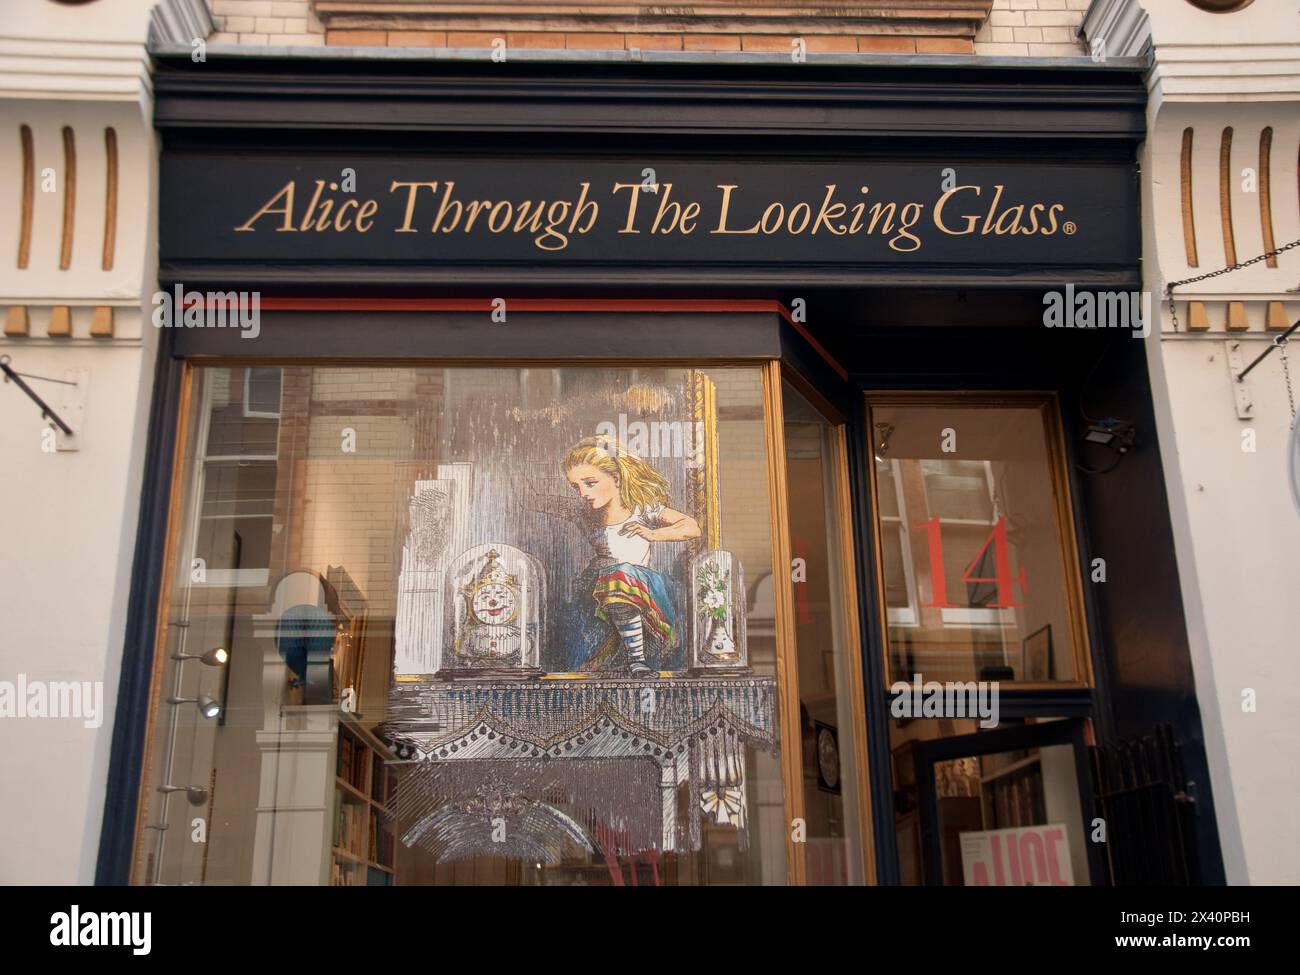 Alice Through the Looking Glass, Buchladen, Cecil Court, City of Westminster, London, UK Stockfoto